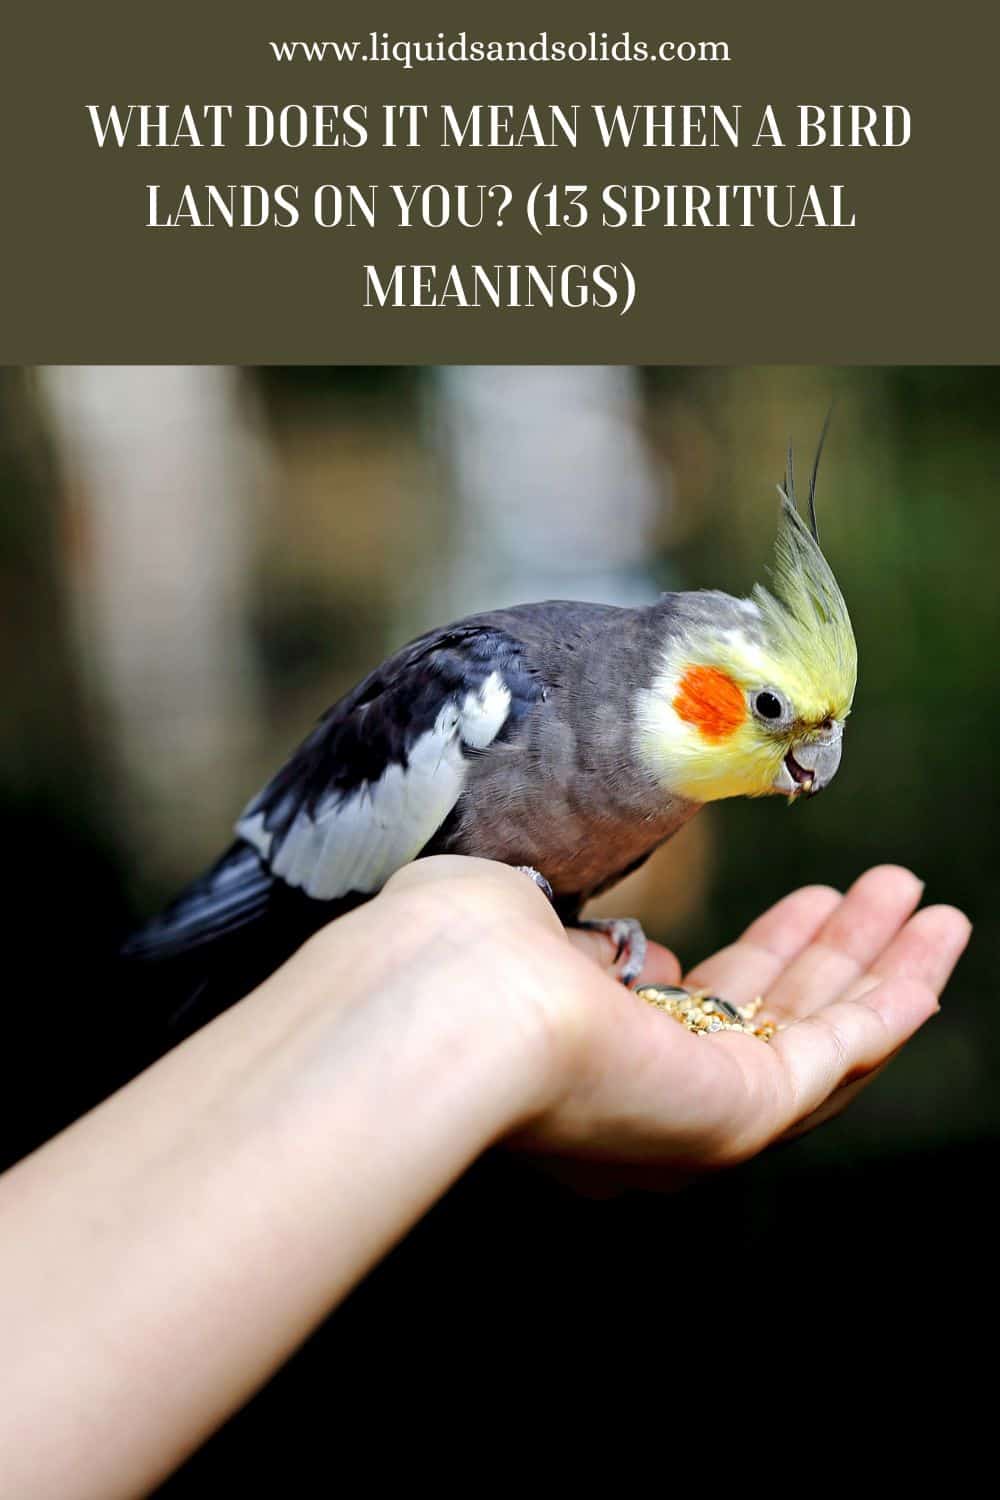 What Does It Mean When A Bird Lands On You (13 Spiritual Meanings)